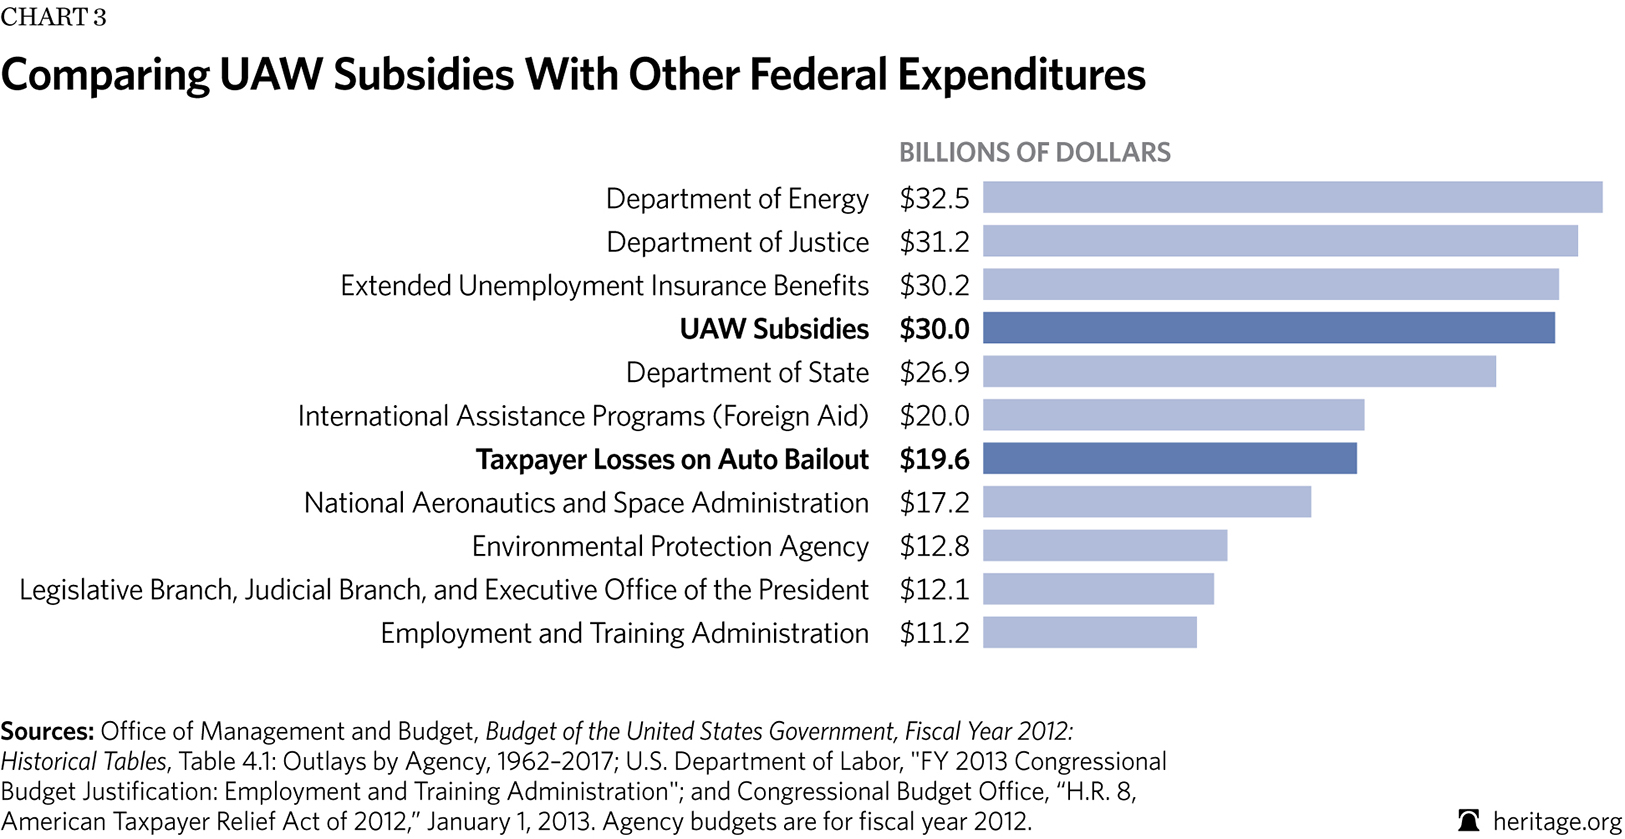 Comparing UAW Subsidies With Other Federal Expenditures 